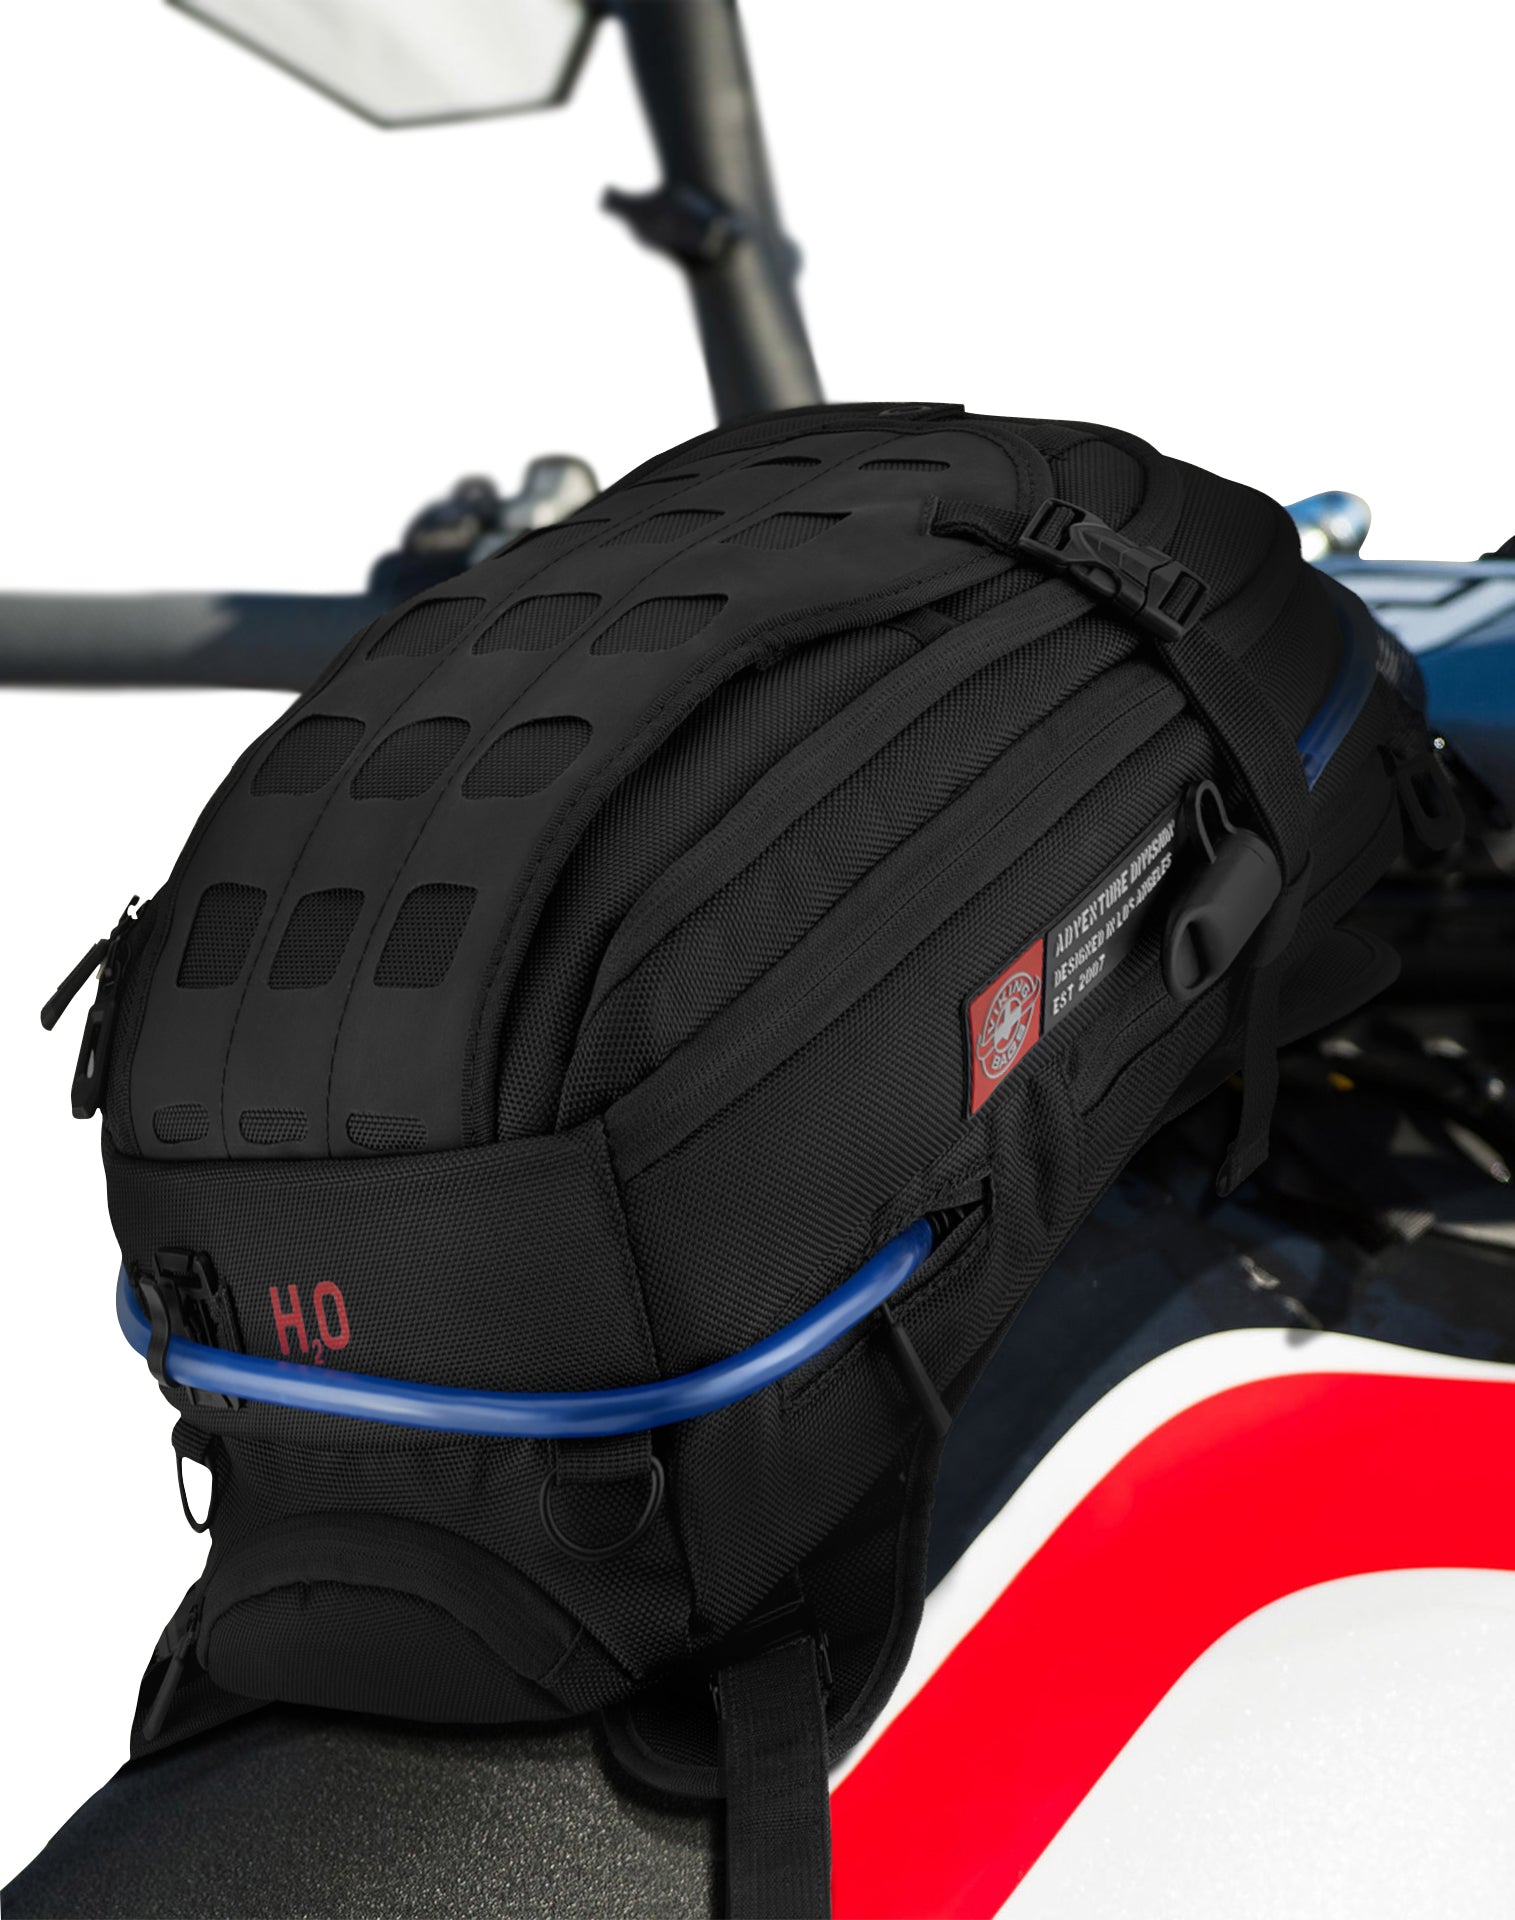 Viking Apex BMW ADV Touring Tank Bag with Hydration Pack on Tank